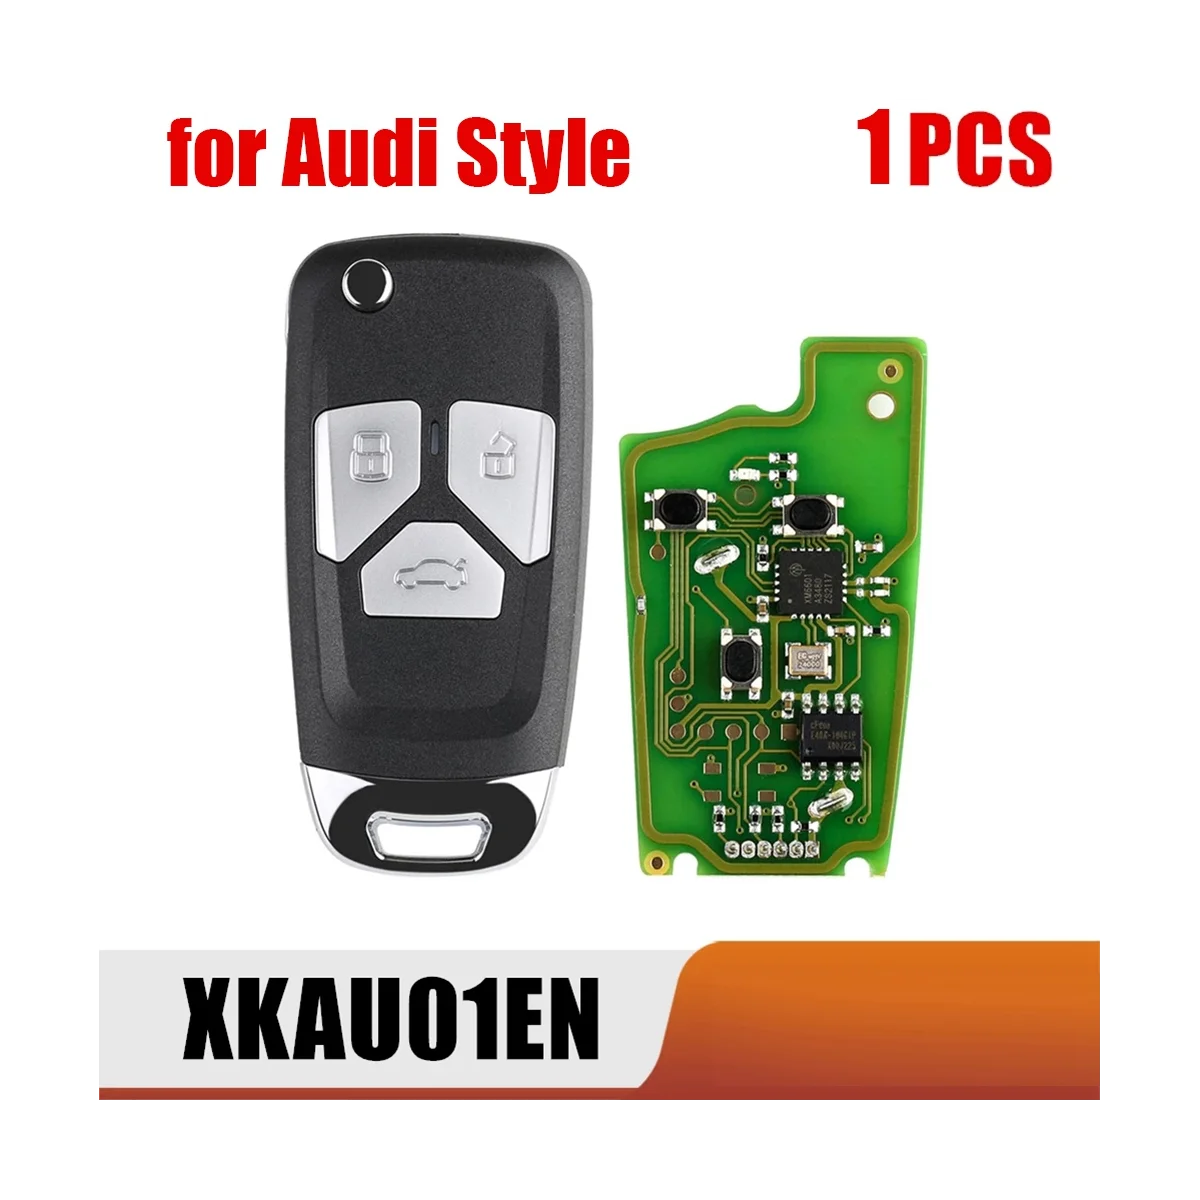 

For Xhorse XKAU01EN Universal Wire Remote Key Fob 3 Button for Audi Style for VVDI Key Tool